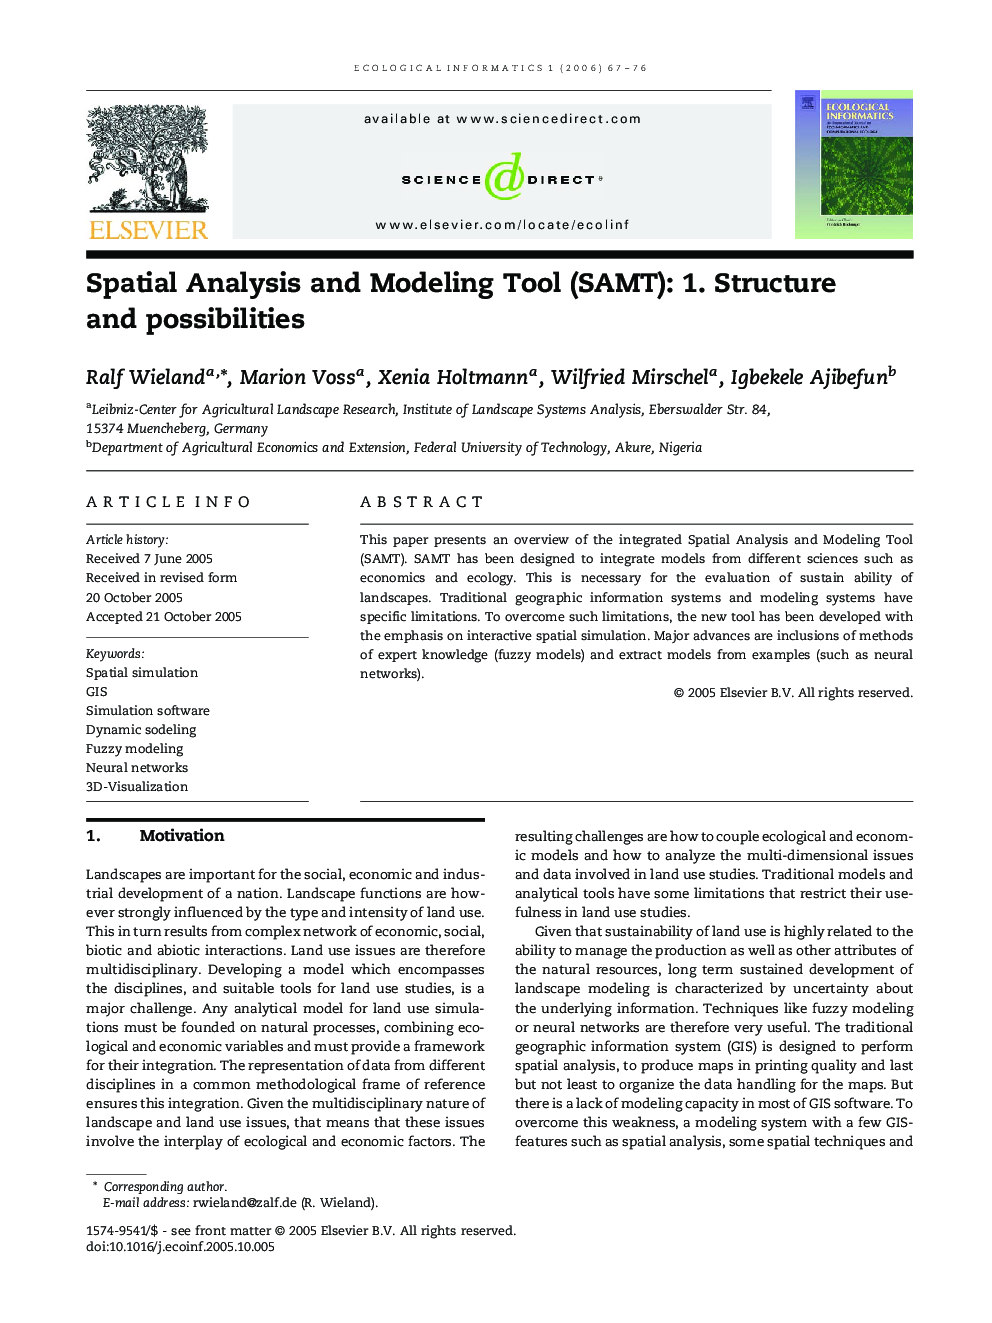 Spatial Analysis and Modeling Tool (SAMT): 1. Structure and possibilities